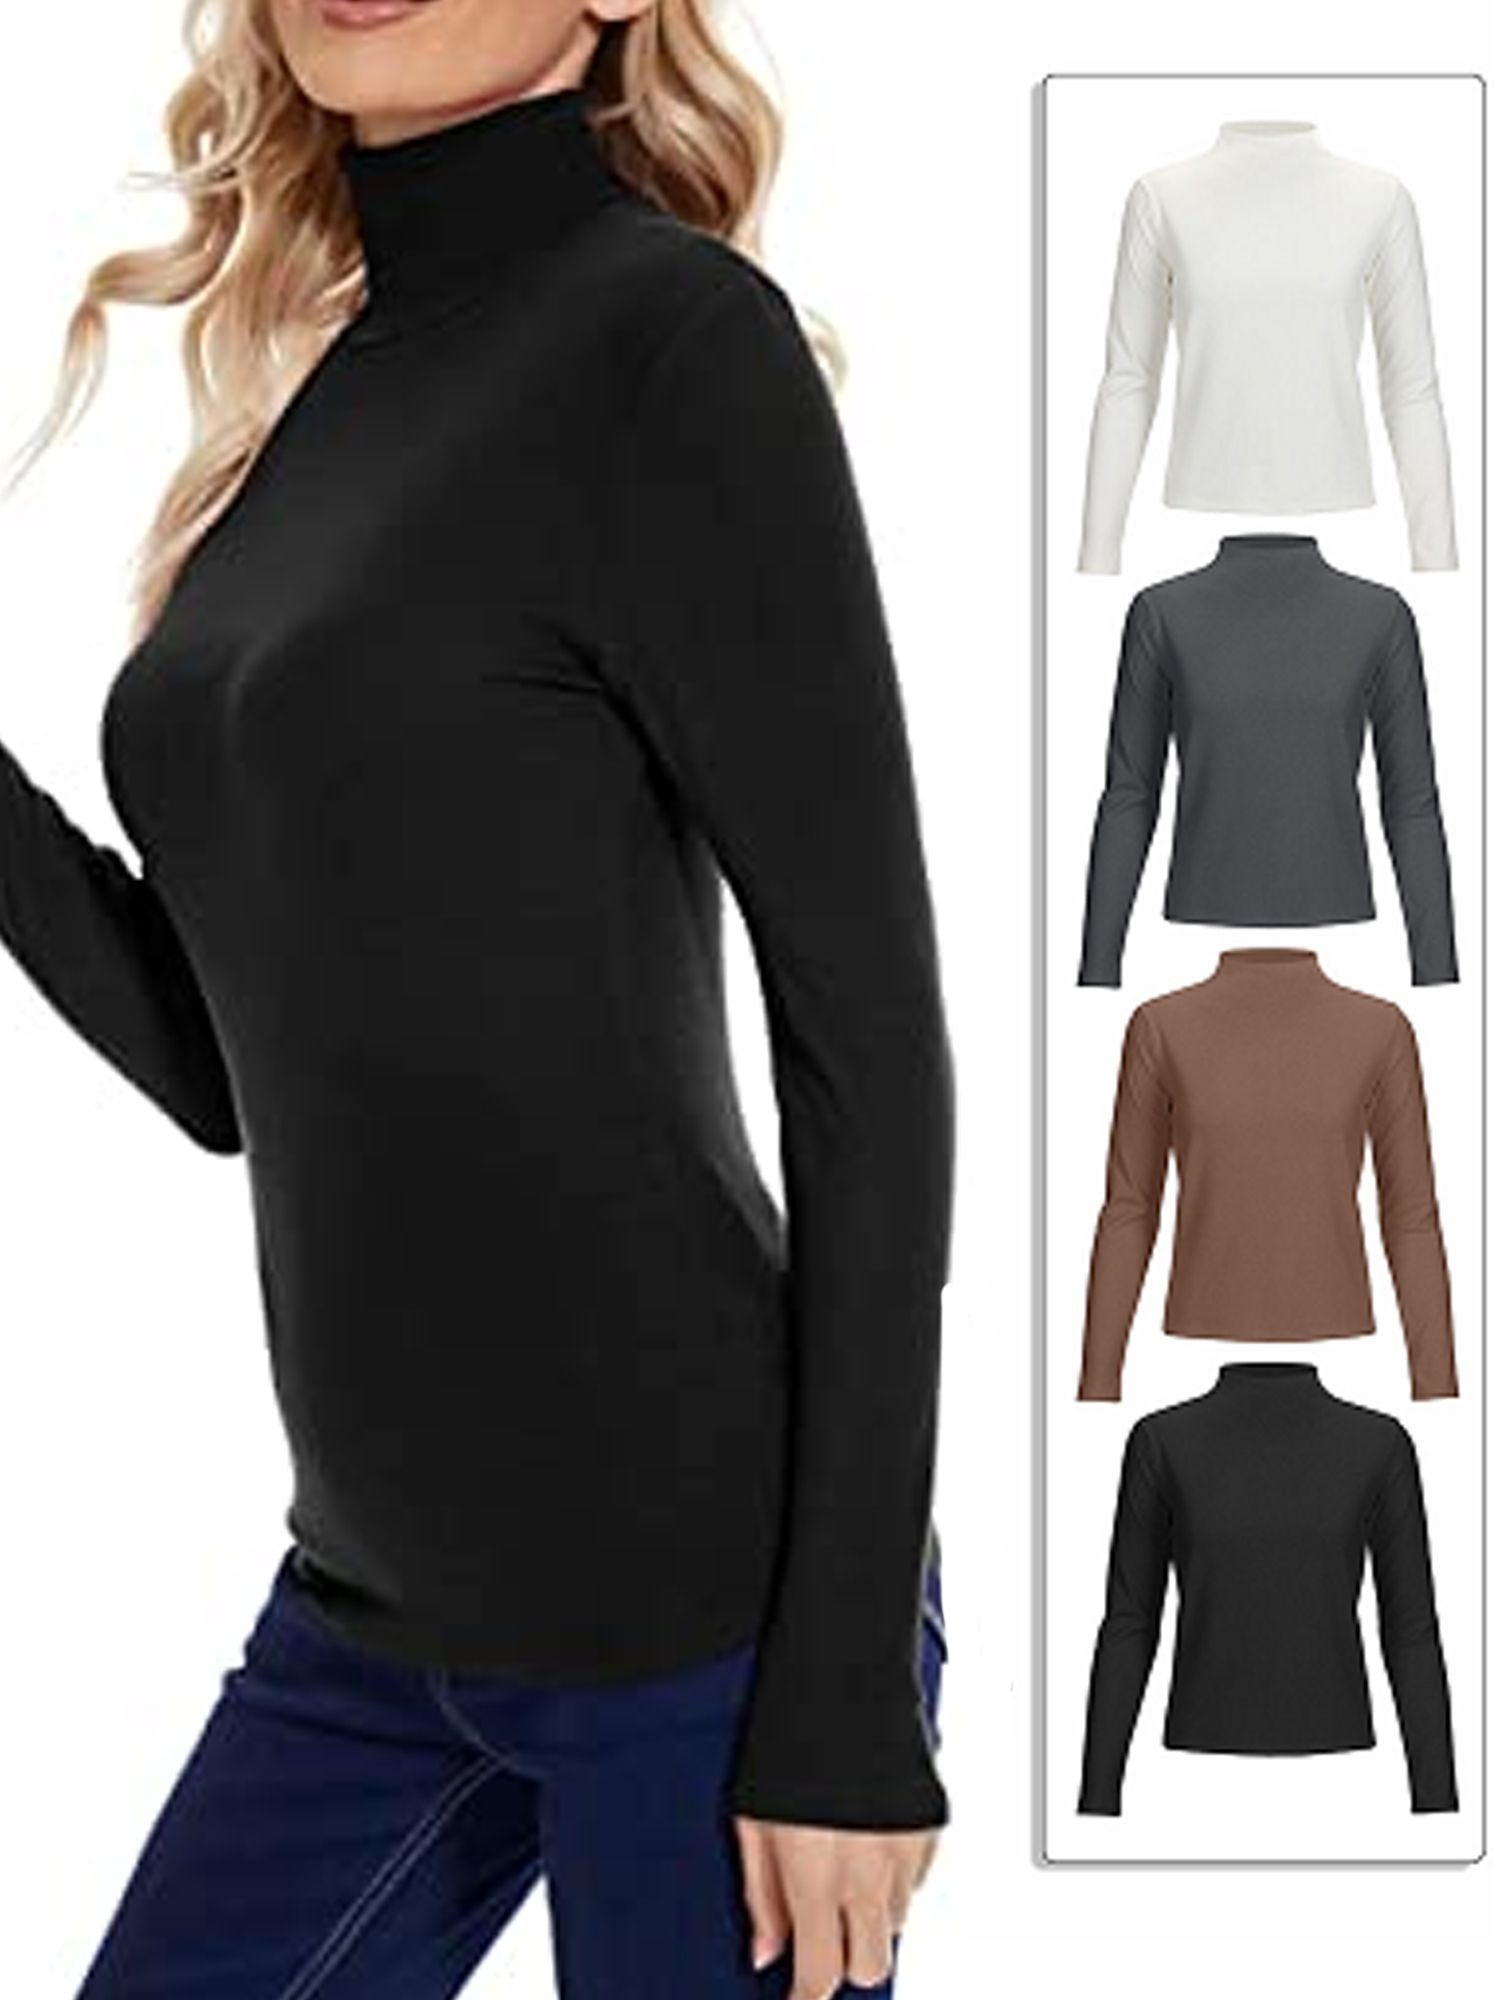 EXCELLENT THERMAL Womens Mock Turtleneck Tops Long Sleeve Shirts Slim Fit  Soft Base Layer Thermal Underwear Top B-White at  Women's Clothing  store